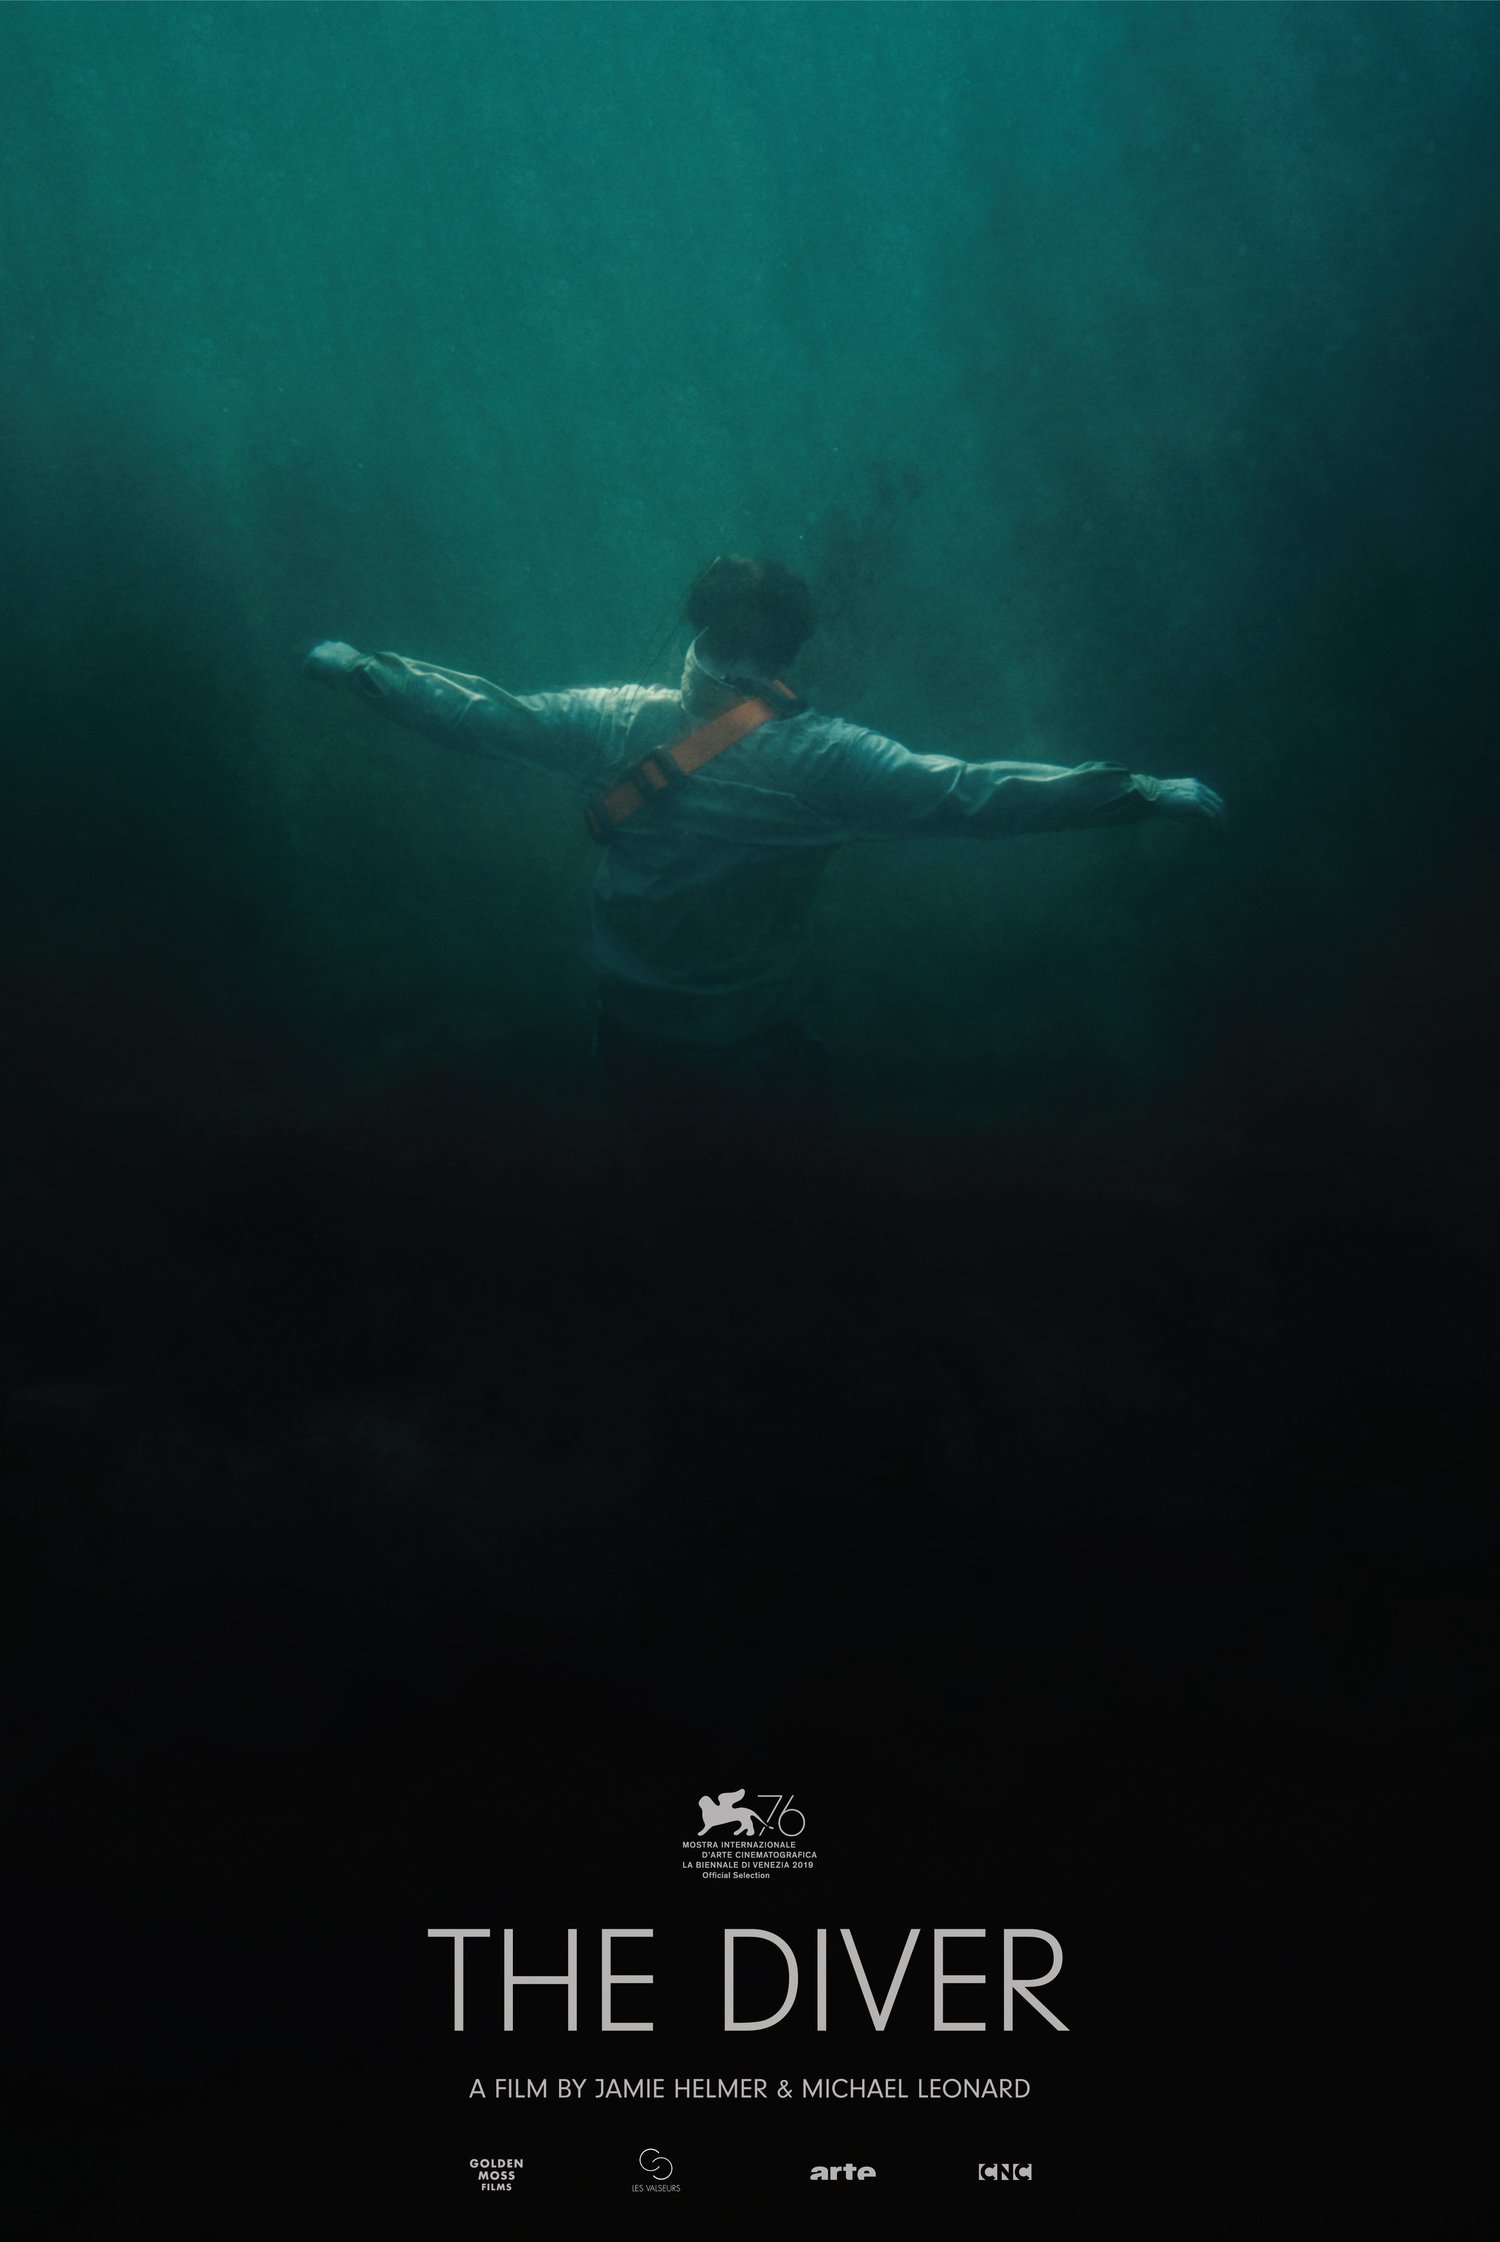 The Diver film poster